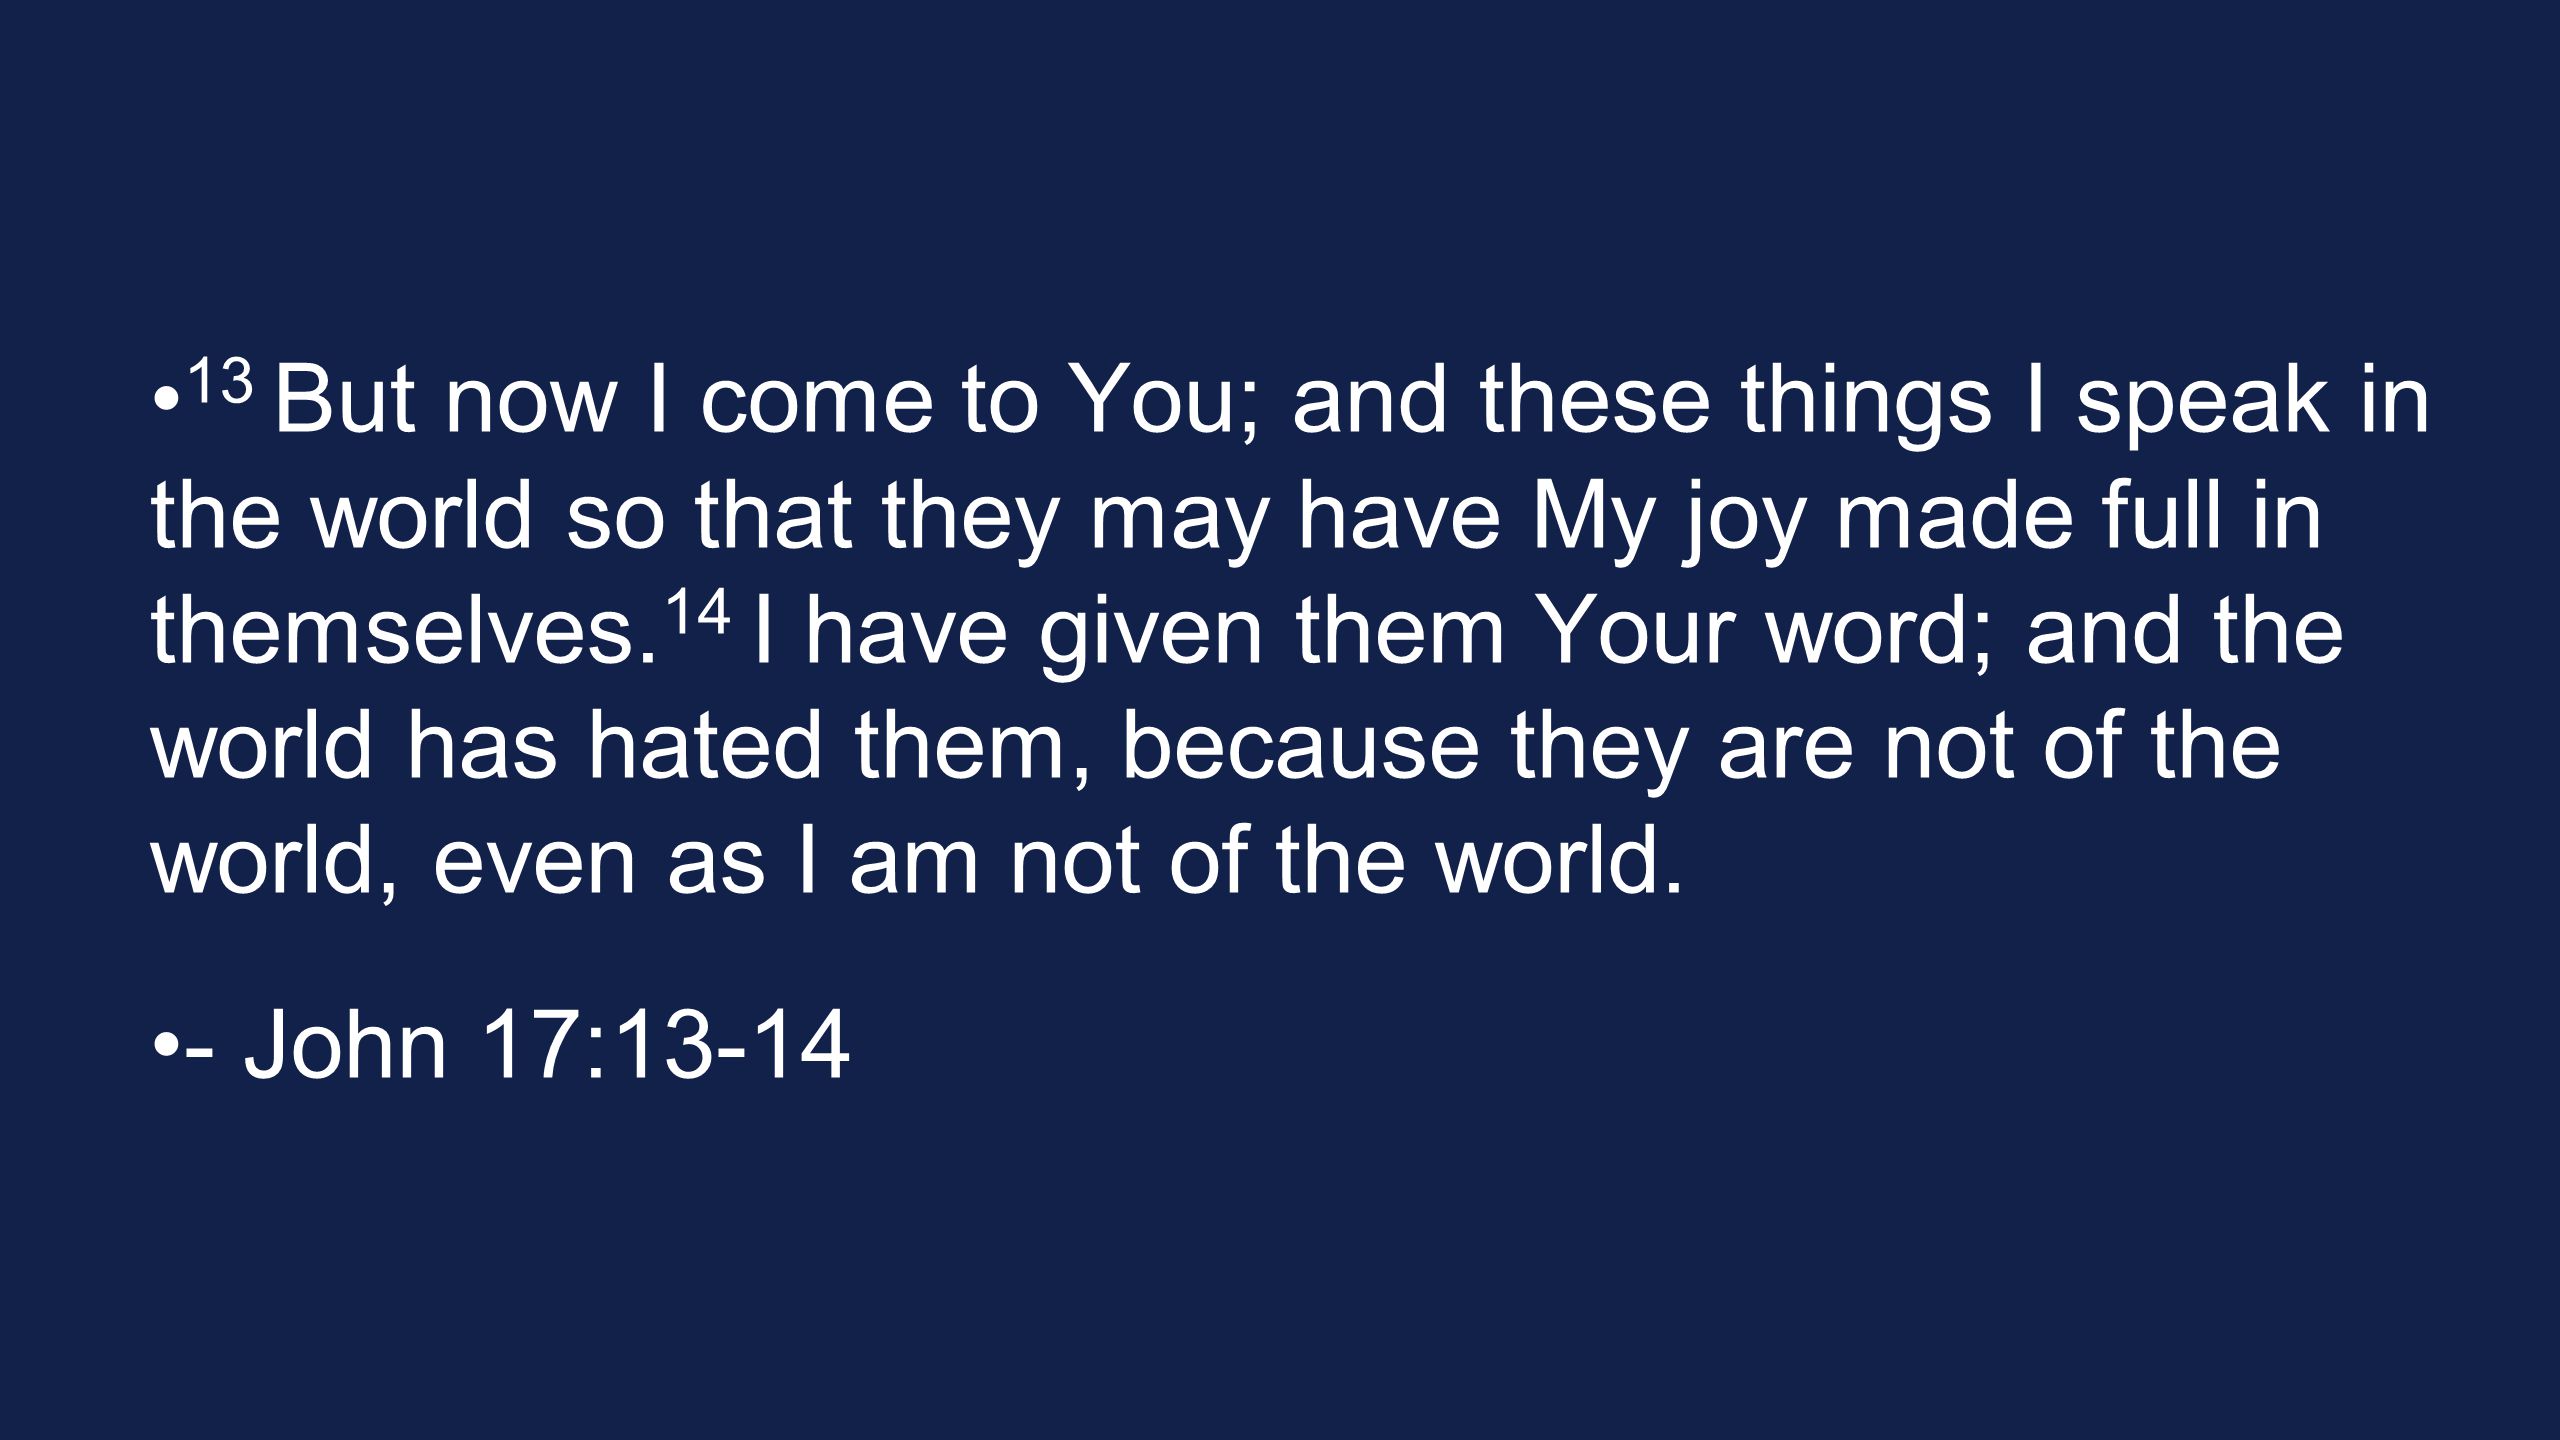 13 But now I come to You; and these things I speak in the world so that they may have My joy made full in themselves.14 I have given them Your word; and the world has hated them, because they are not of the world, even as I am not of the world.